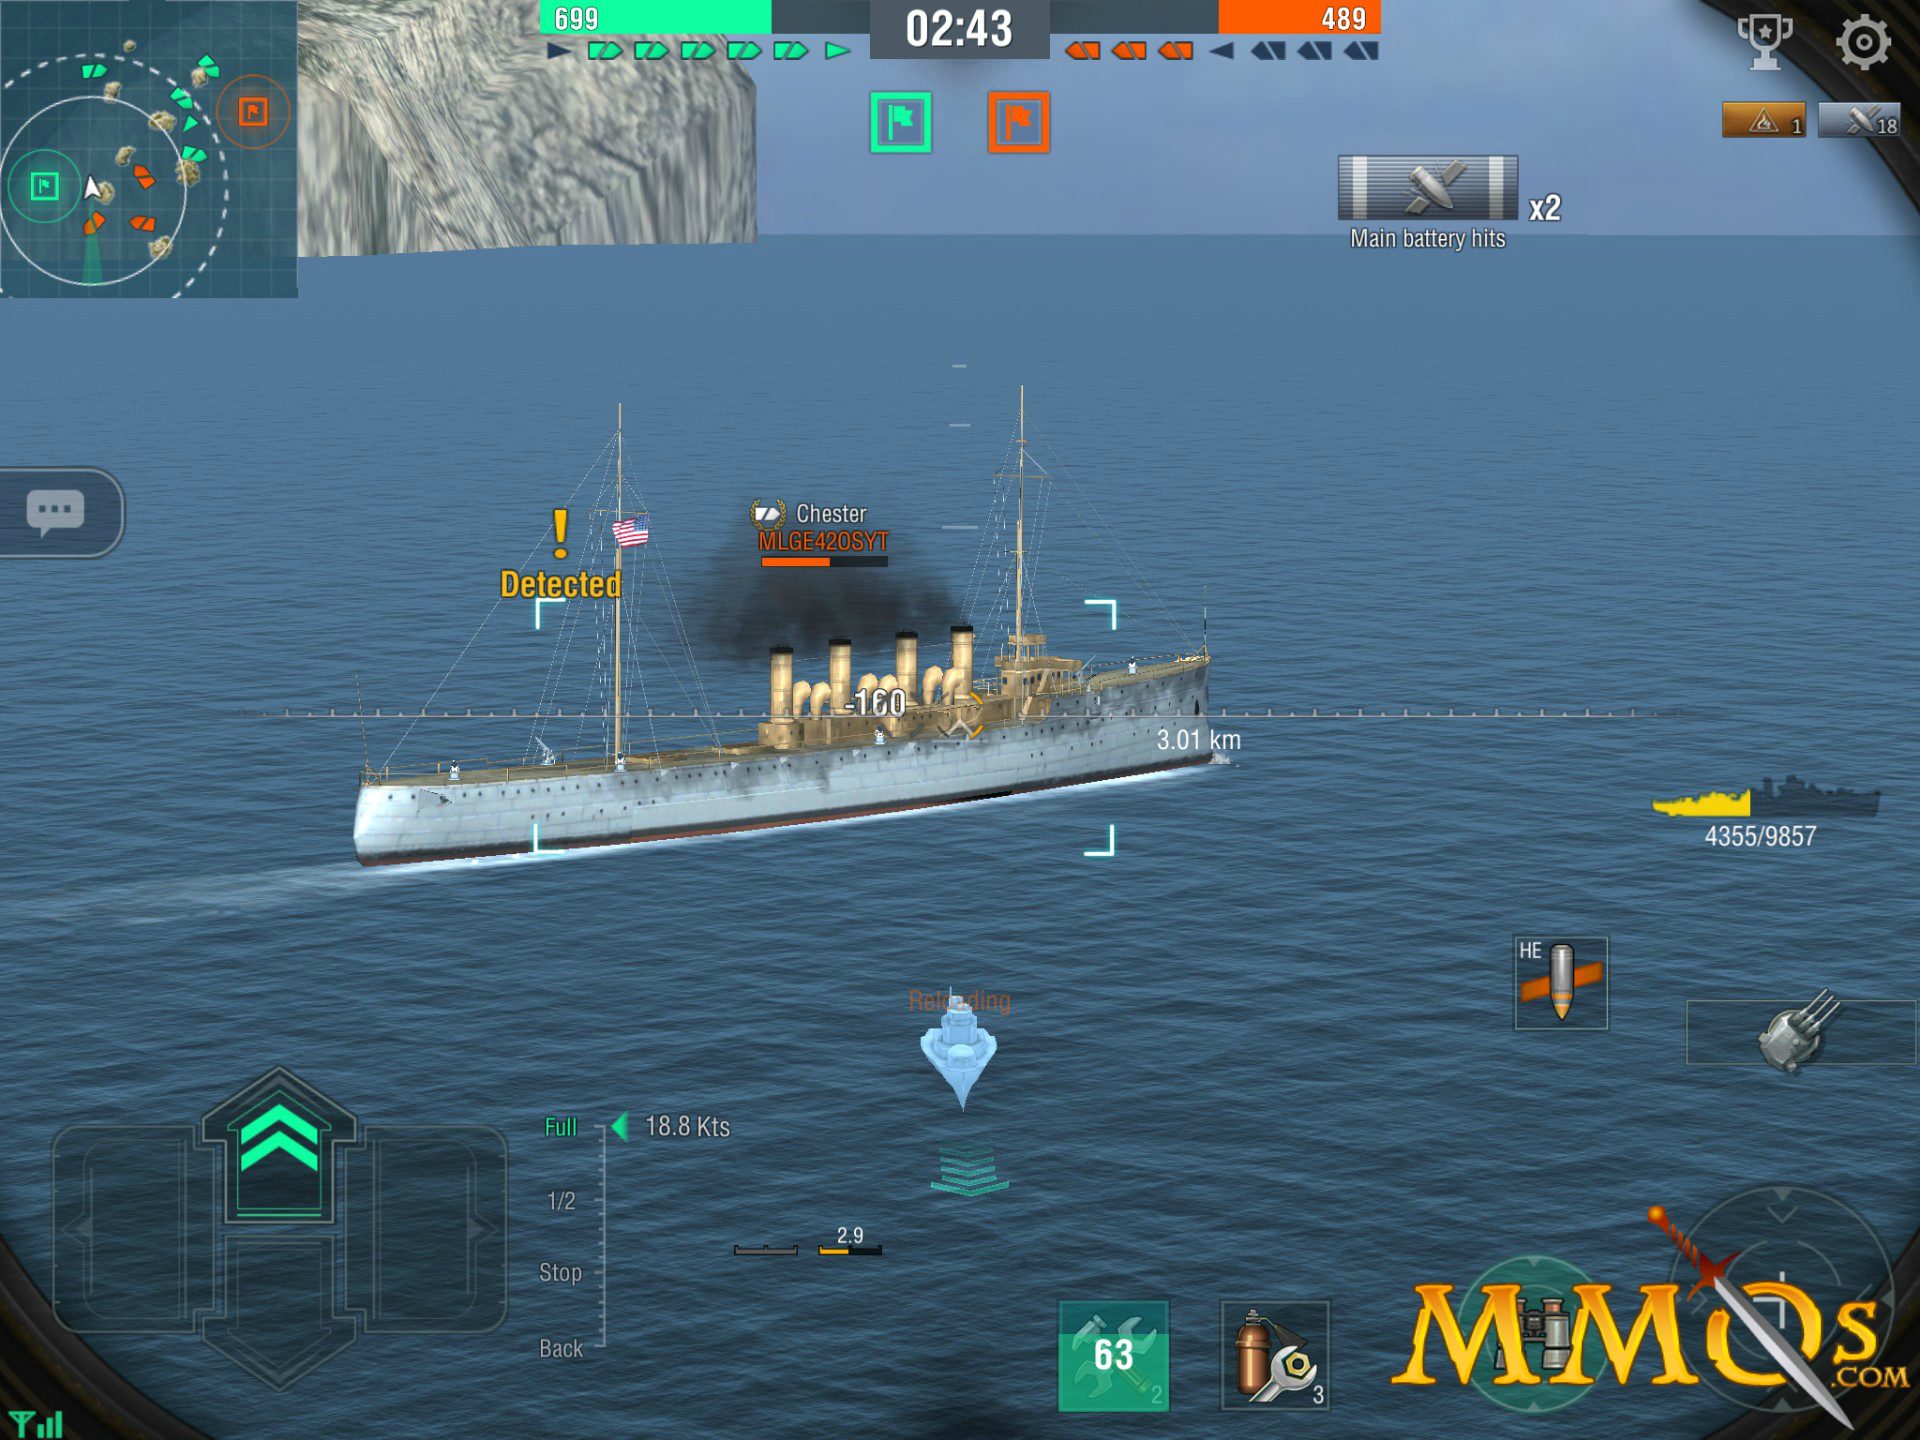 world of warships aim assist download 2017